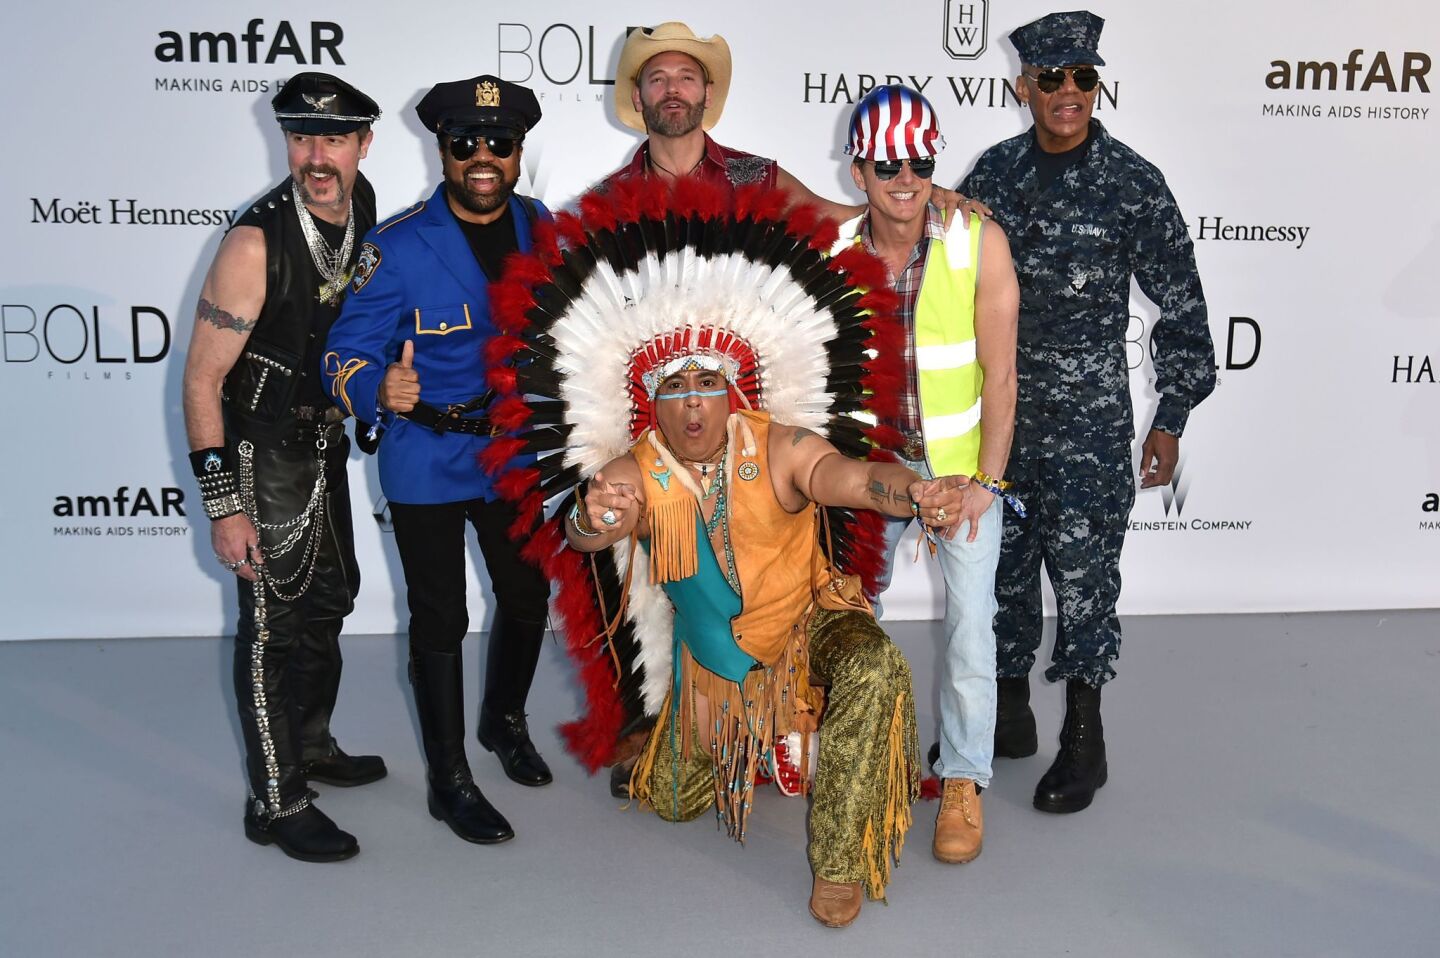 Eric Anzalone, front, Ray Simpson, Jim Newman, Felipe Rose, Bill Whitefield and Alex Briley of the band Village People pose as they arrive for the amfAR's 23rd Cinema Against AIDS Gala.